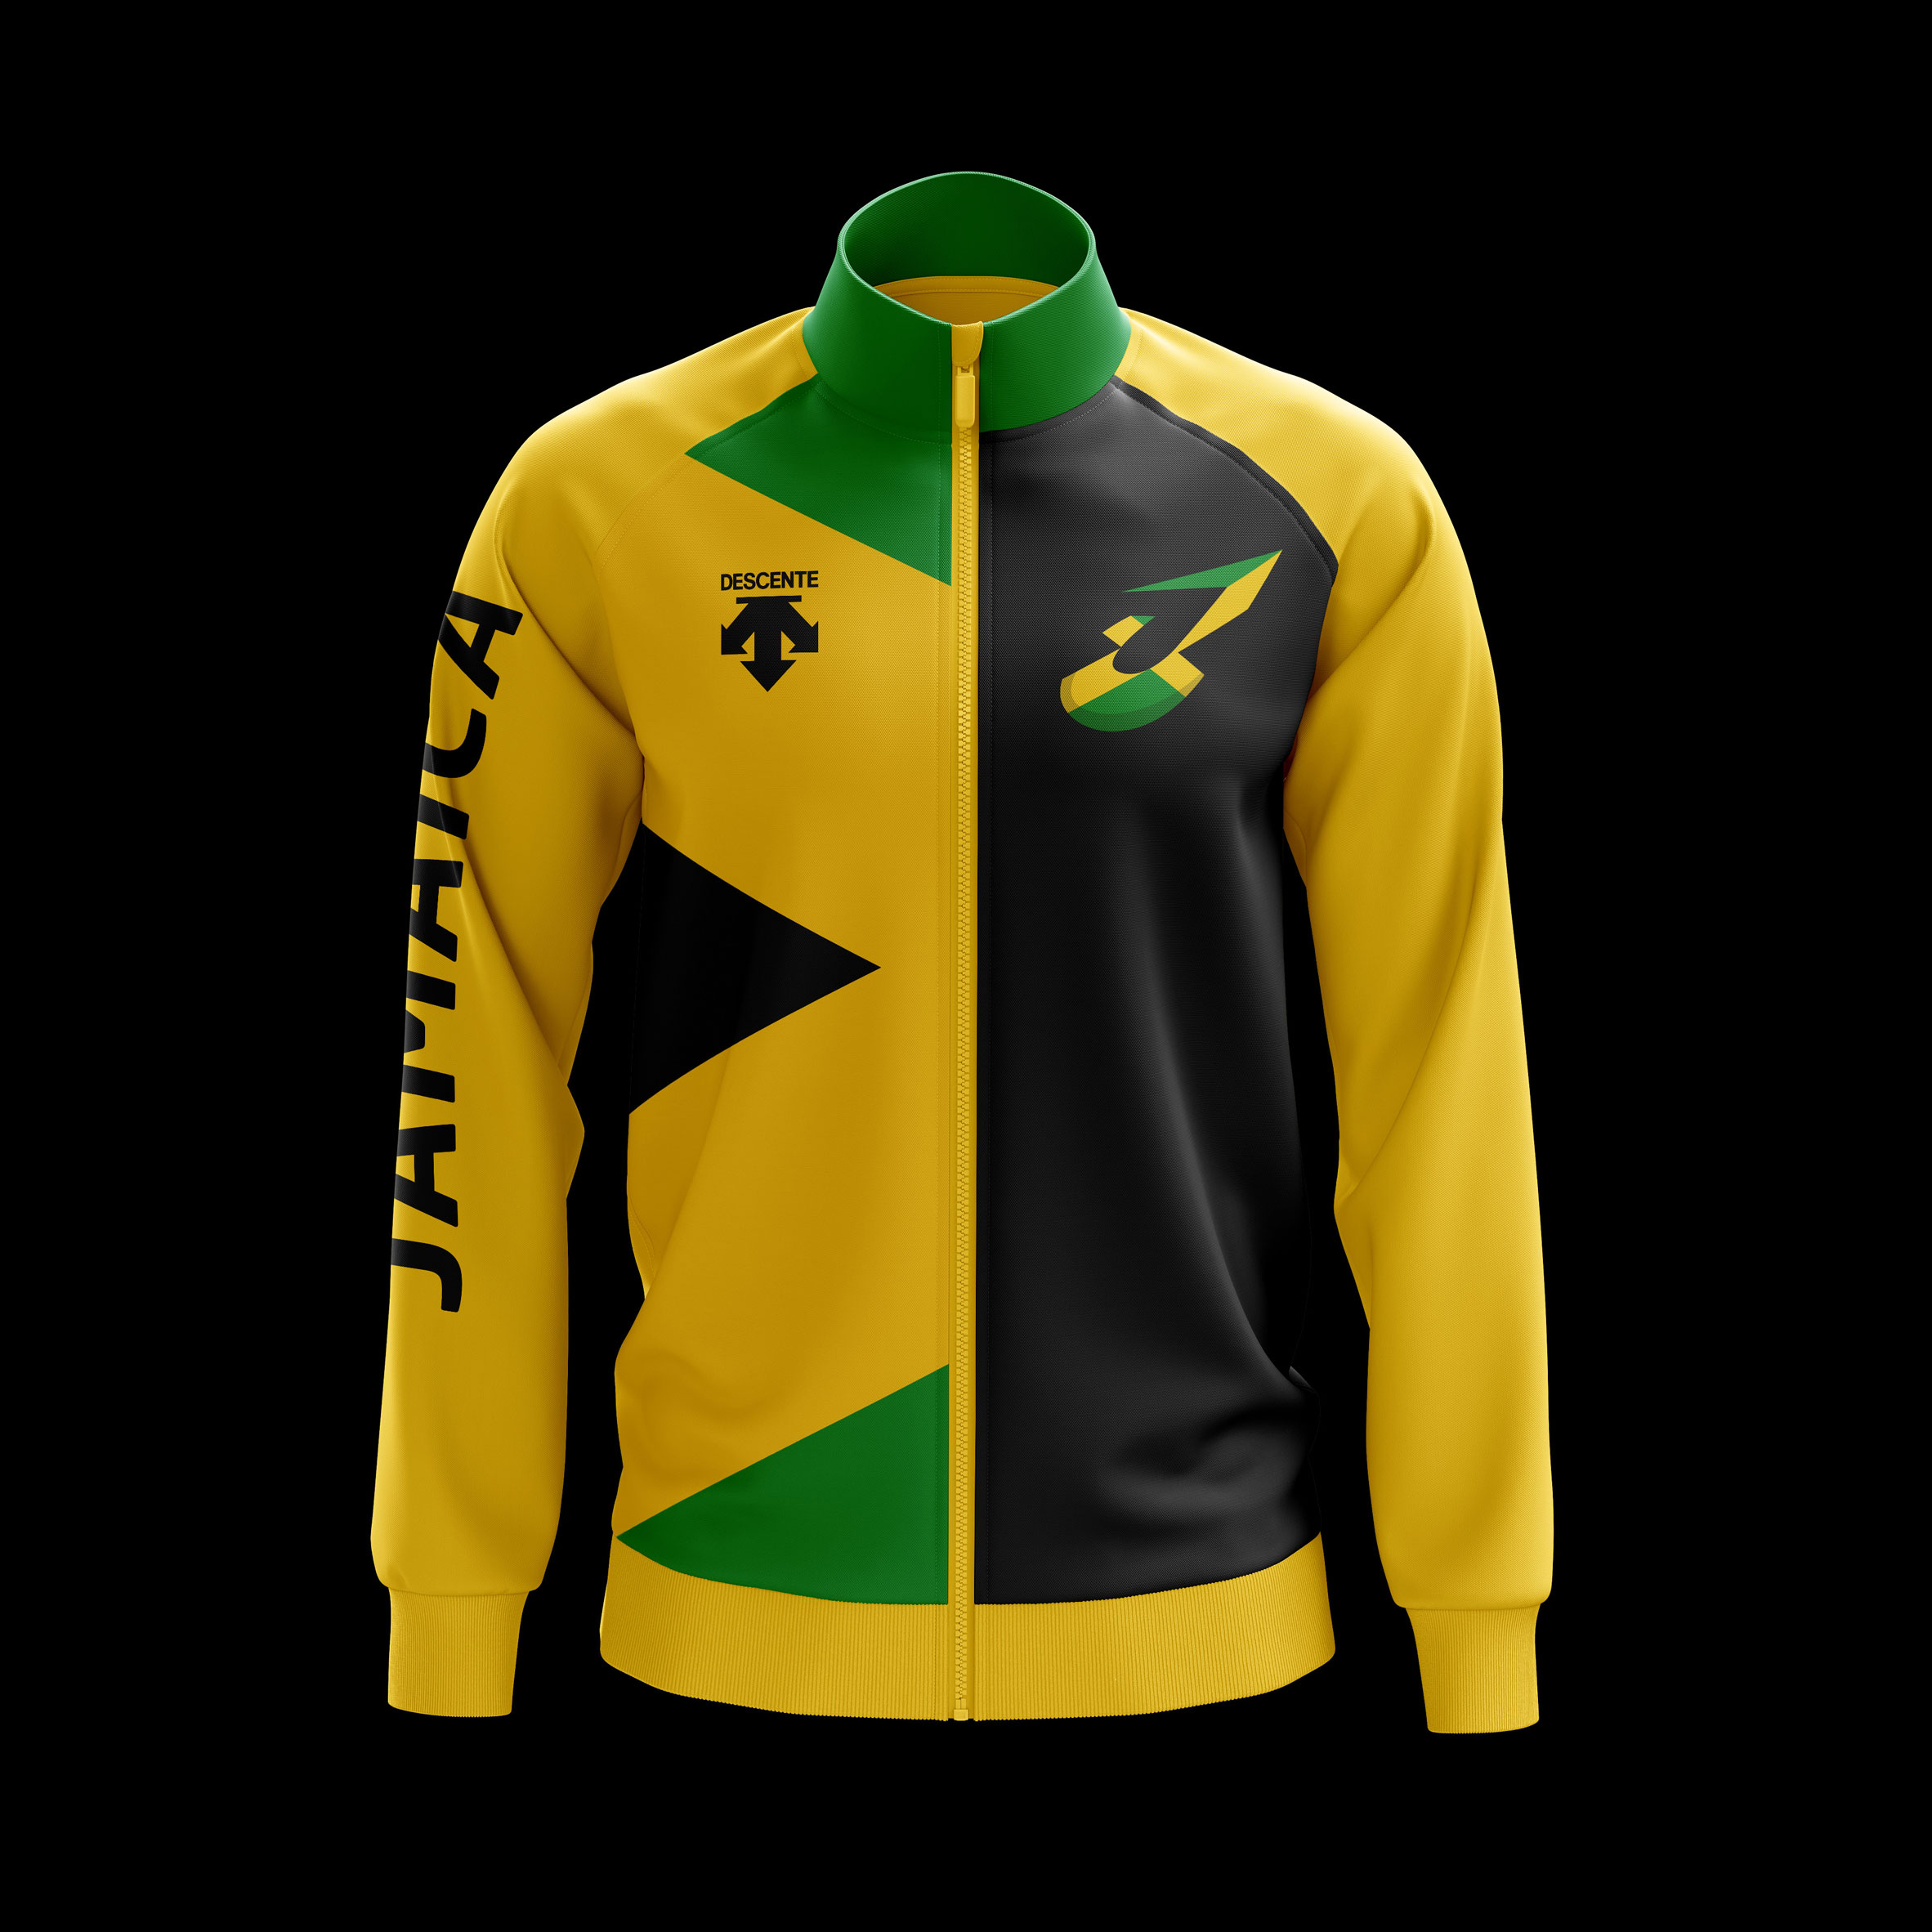 We Launch has created a new identity for the Jamaican bobsleigh and skeleton teams for the 2018 Winter Olympics, in Pyeongchang, South Korea, that aims to move the team away from its association with the film Cool Runnings.